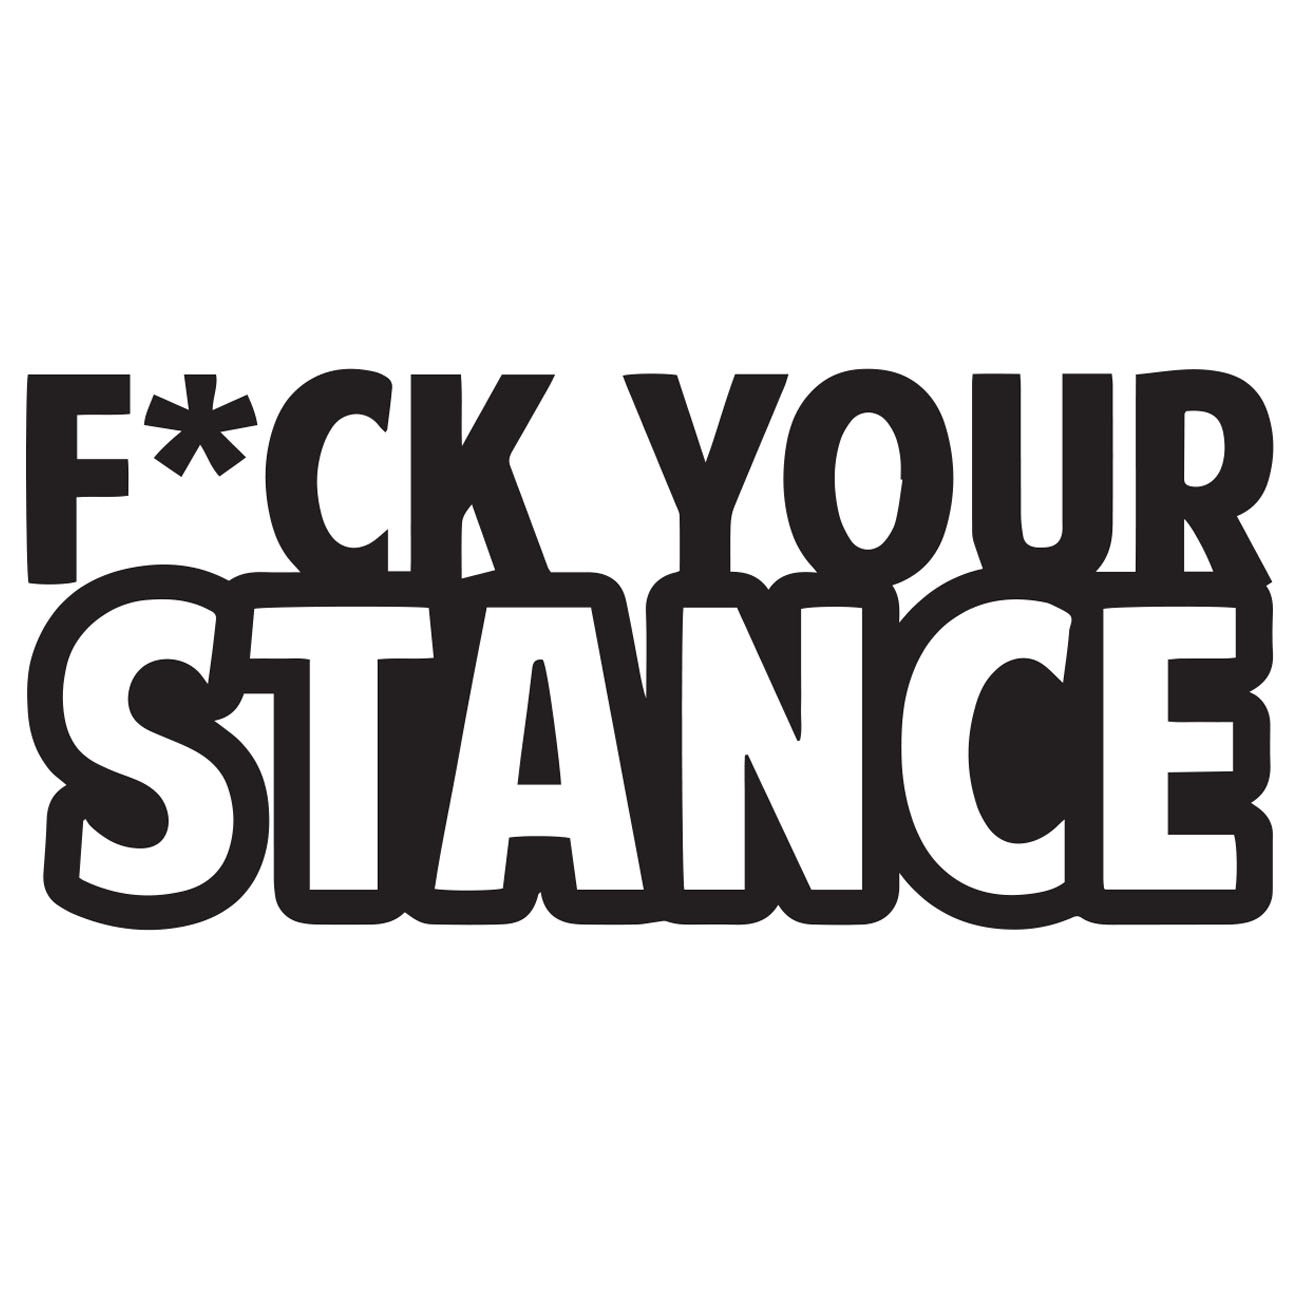 Fuck your stance